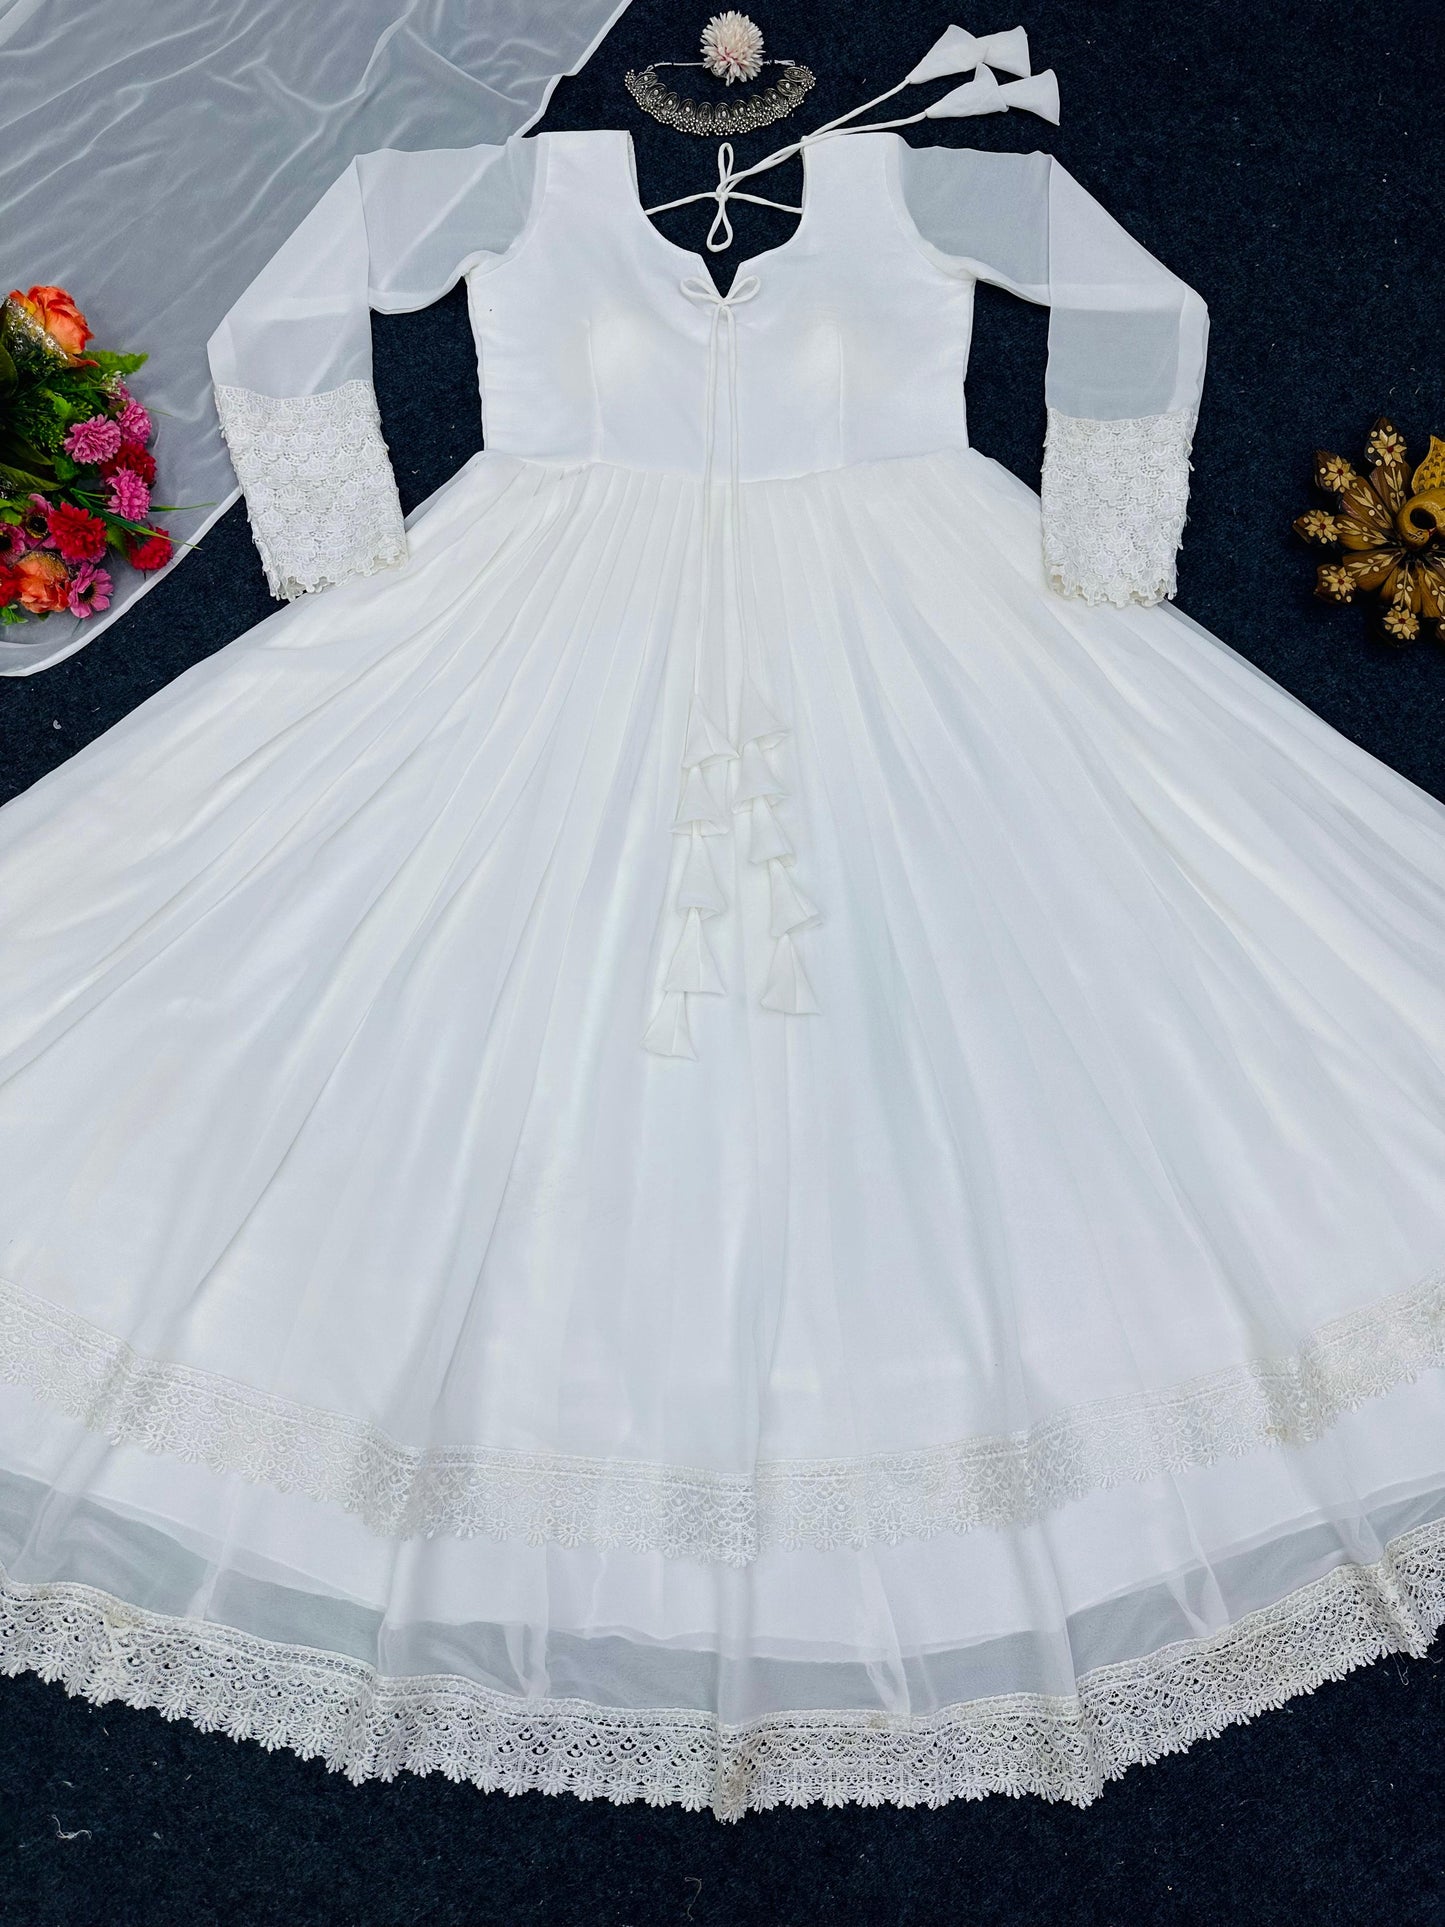 Buy White Womens Gowns Online at Best Prices In India